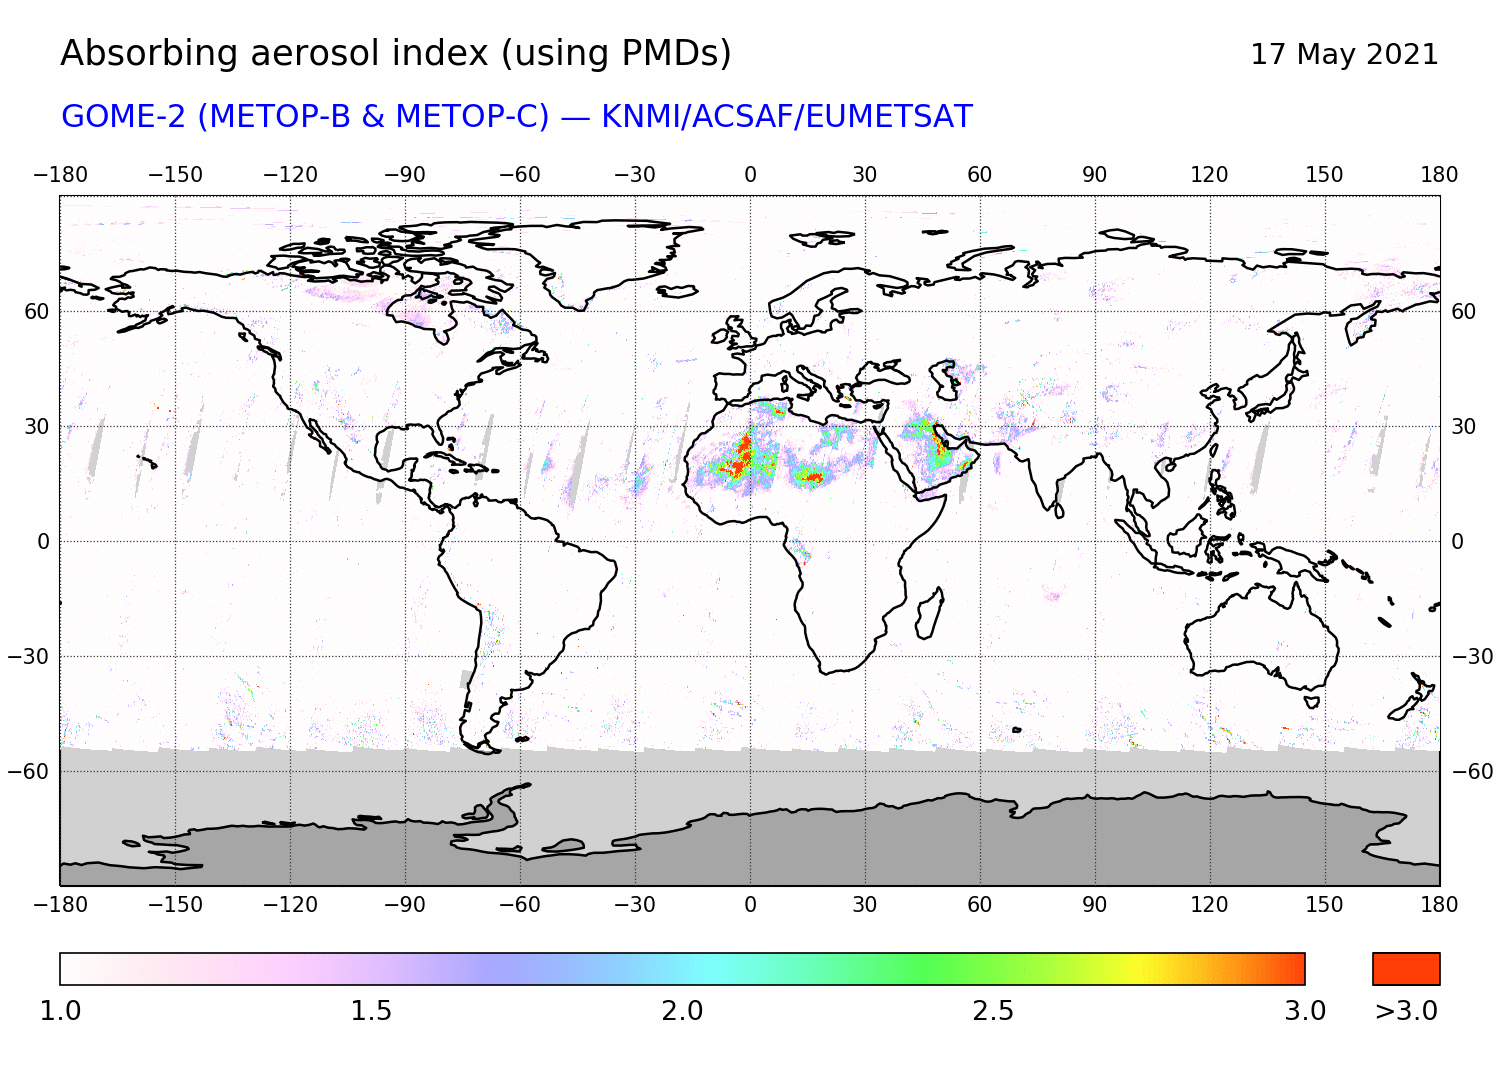 GOME-2 - Absorbing aerosol index of 17 May 2021